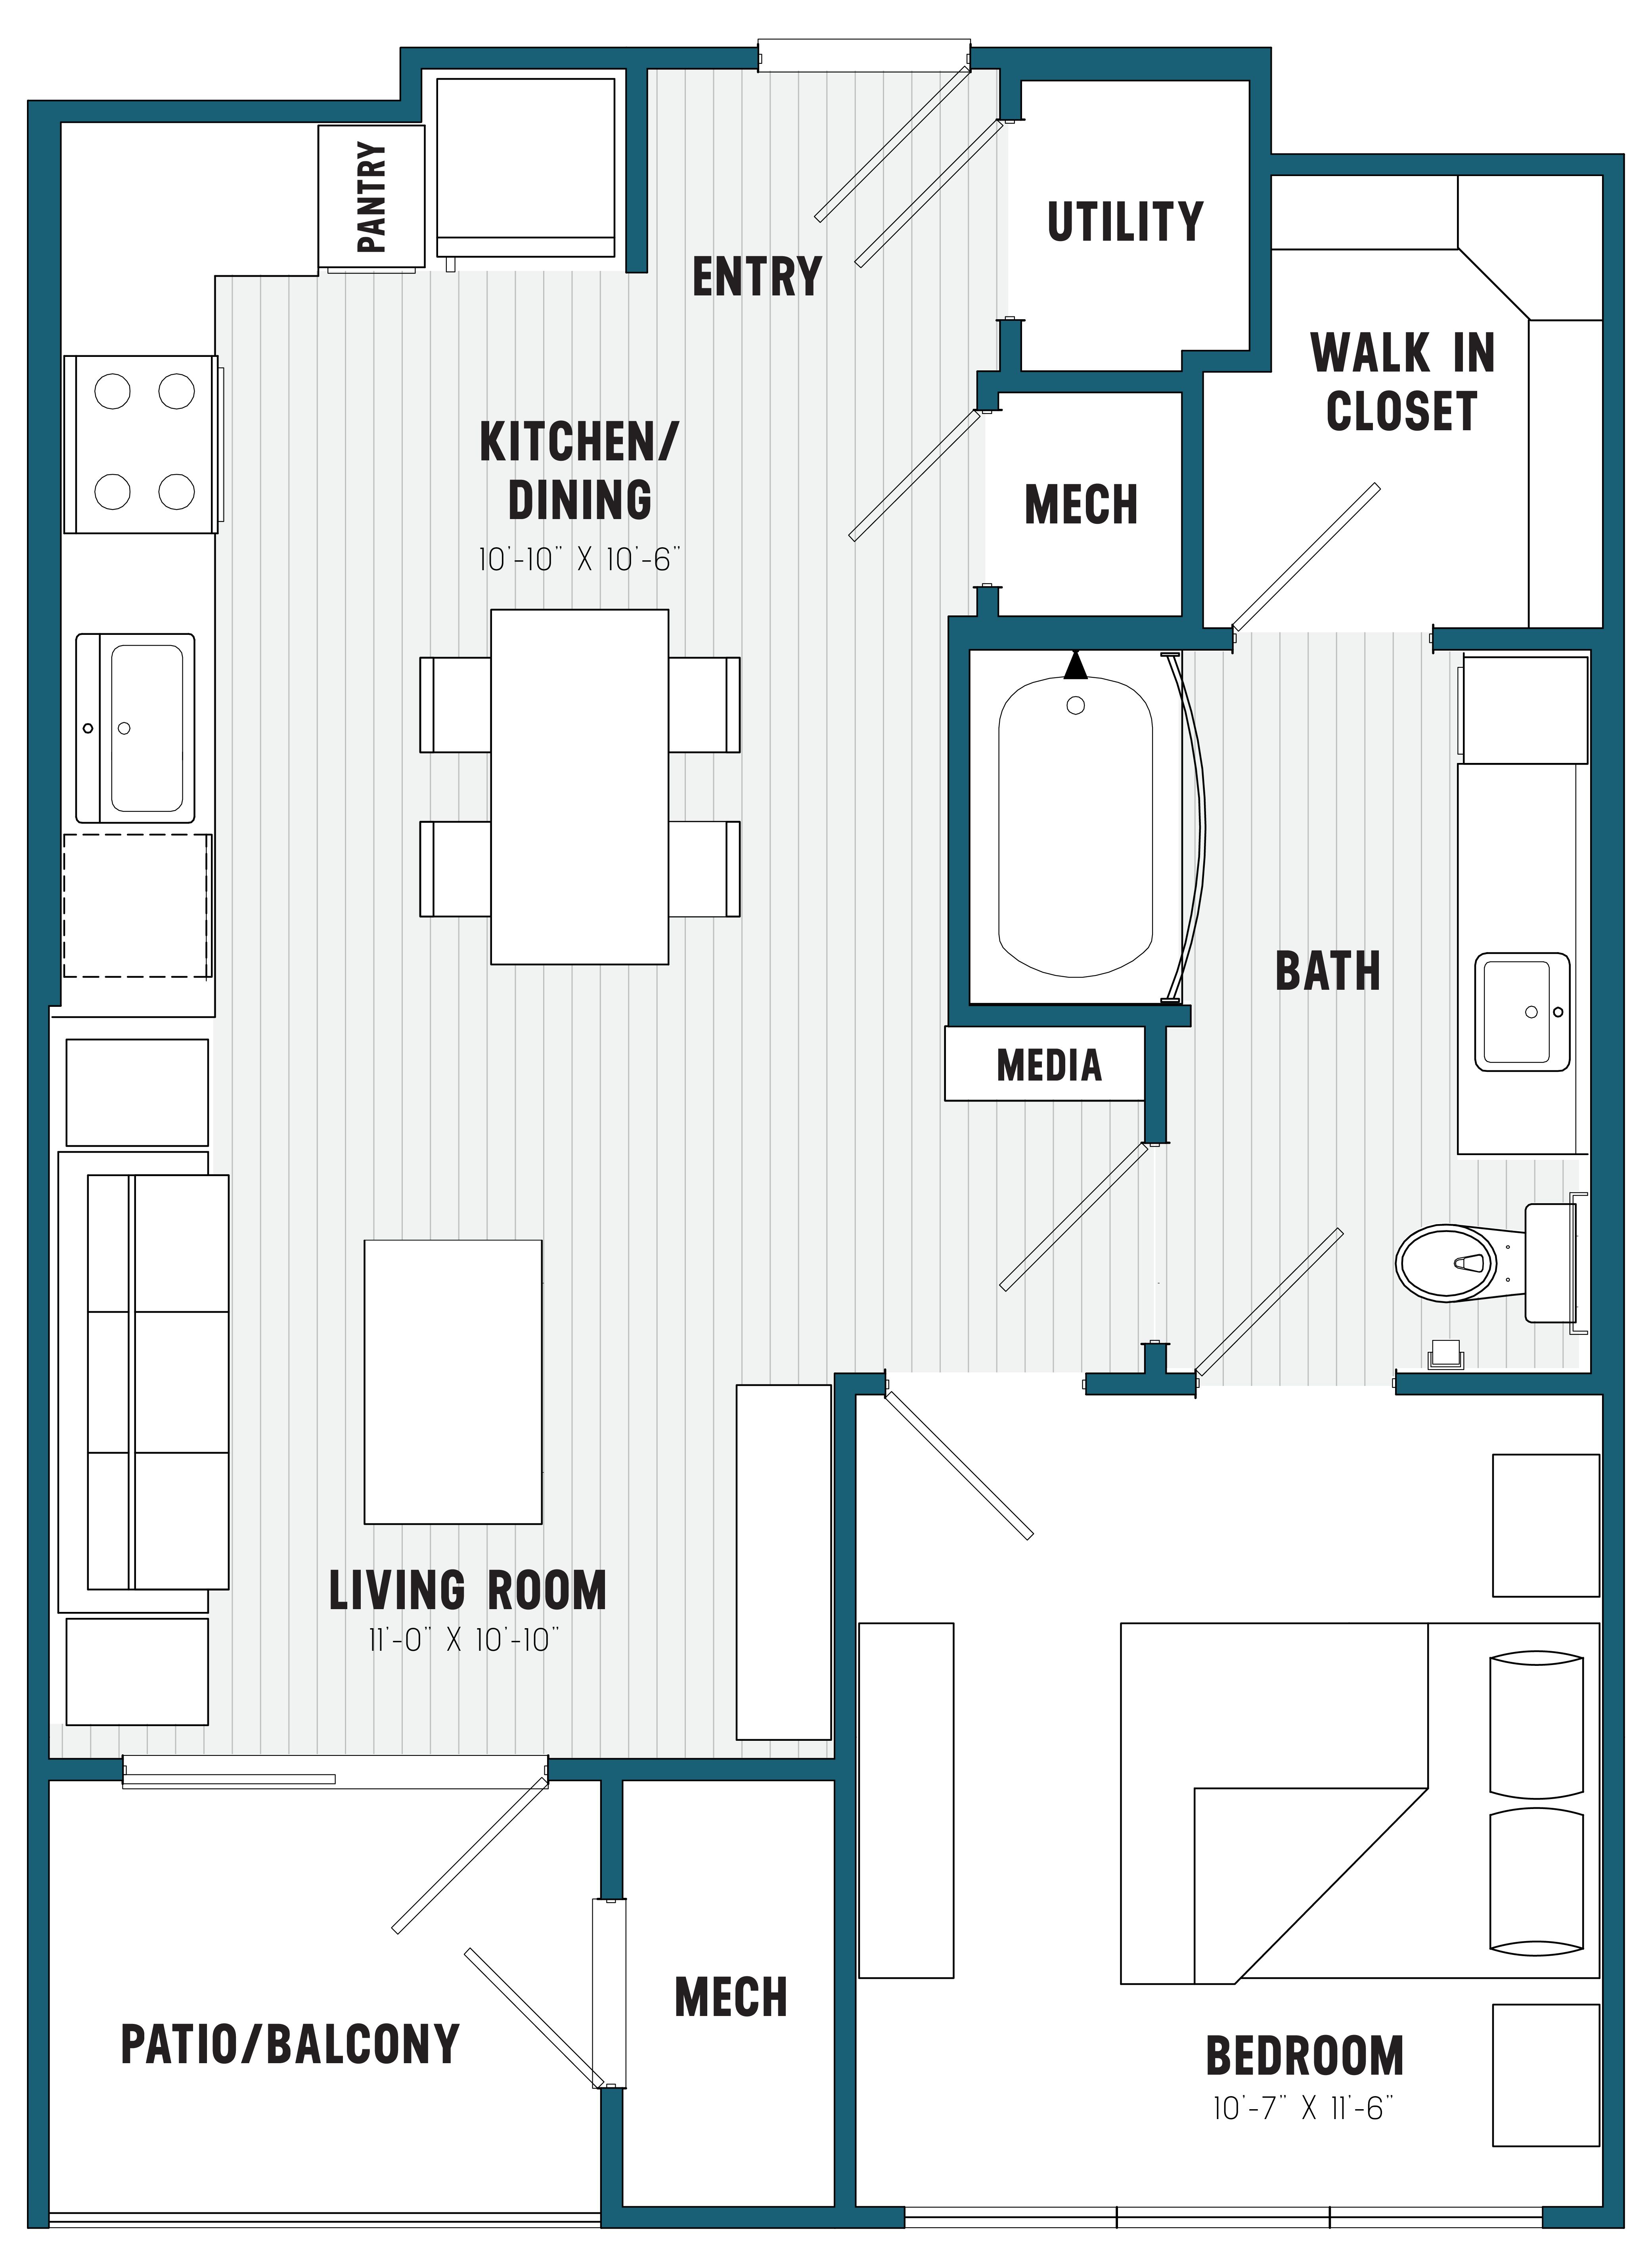 One-bedroom apartment floor plan at Brookland Apartments in West Columbia, SC